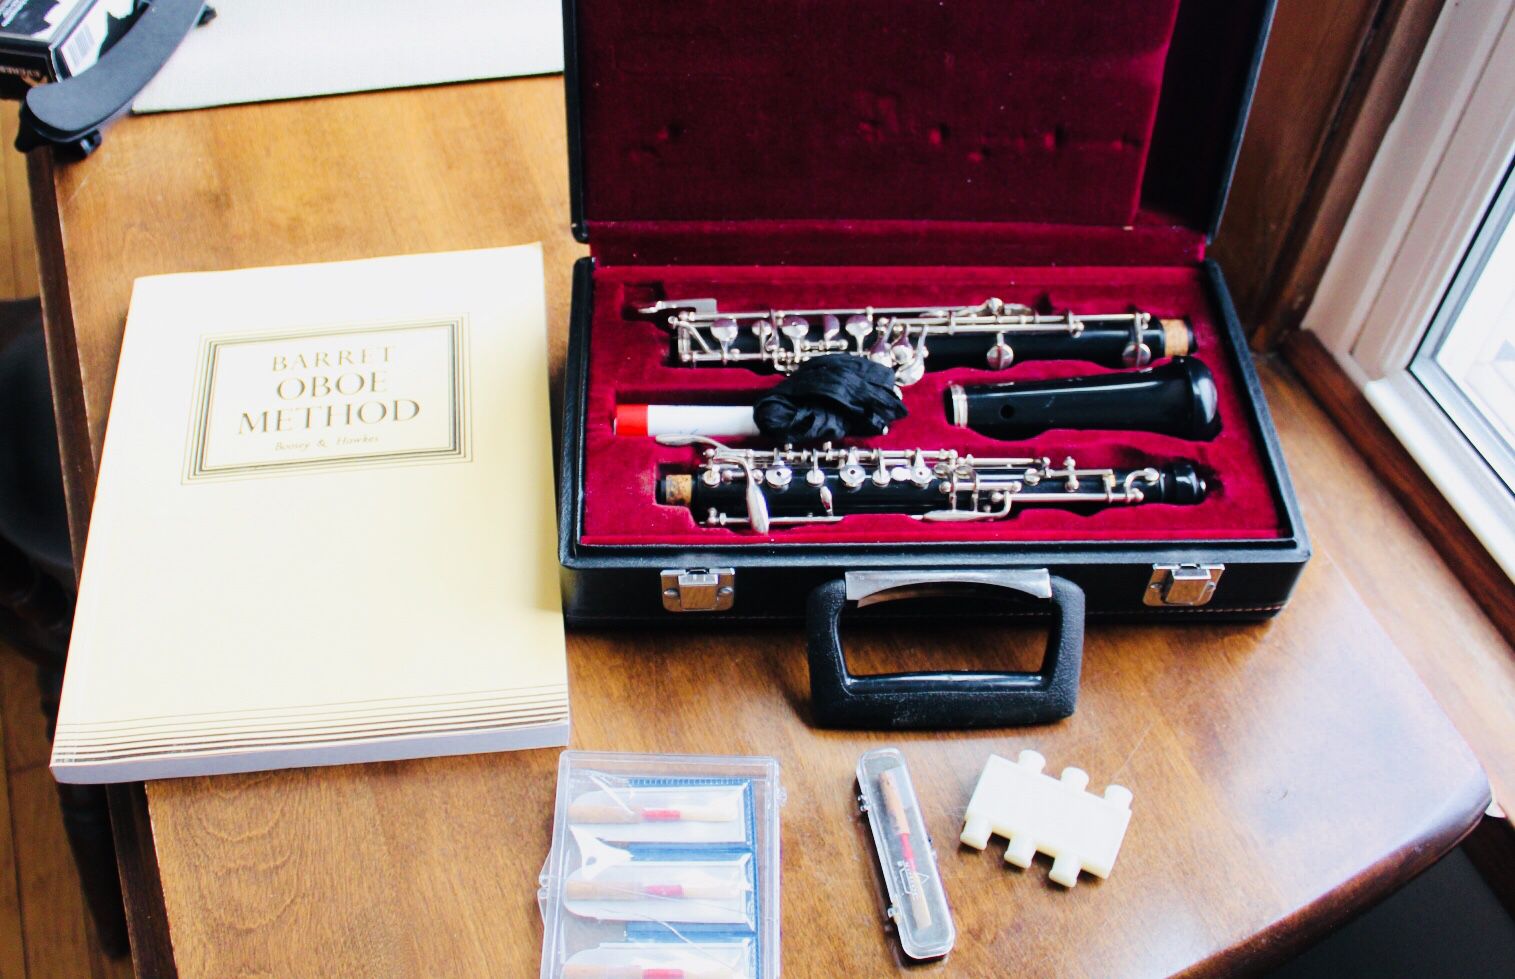 Yamaha Student Oboe Great Condition with additional items